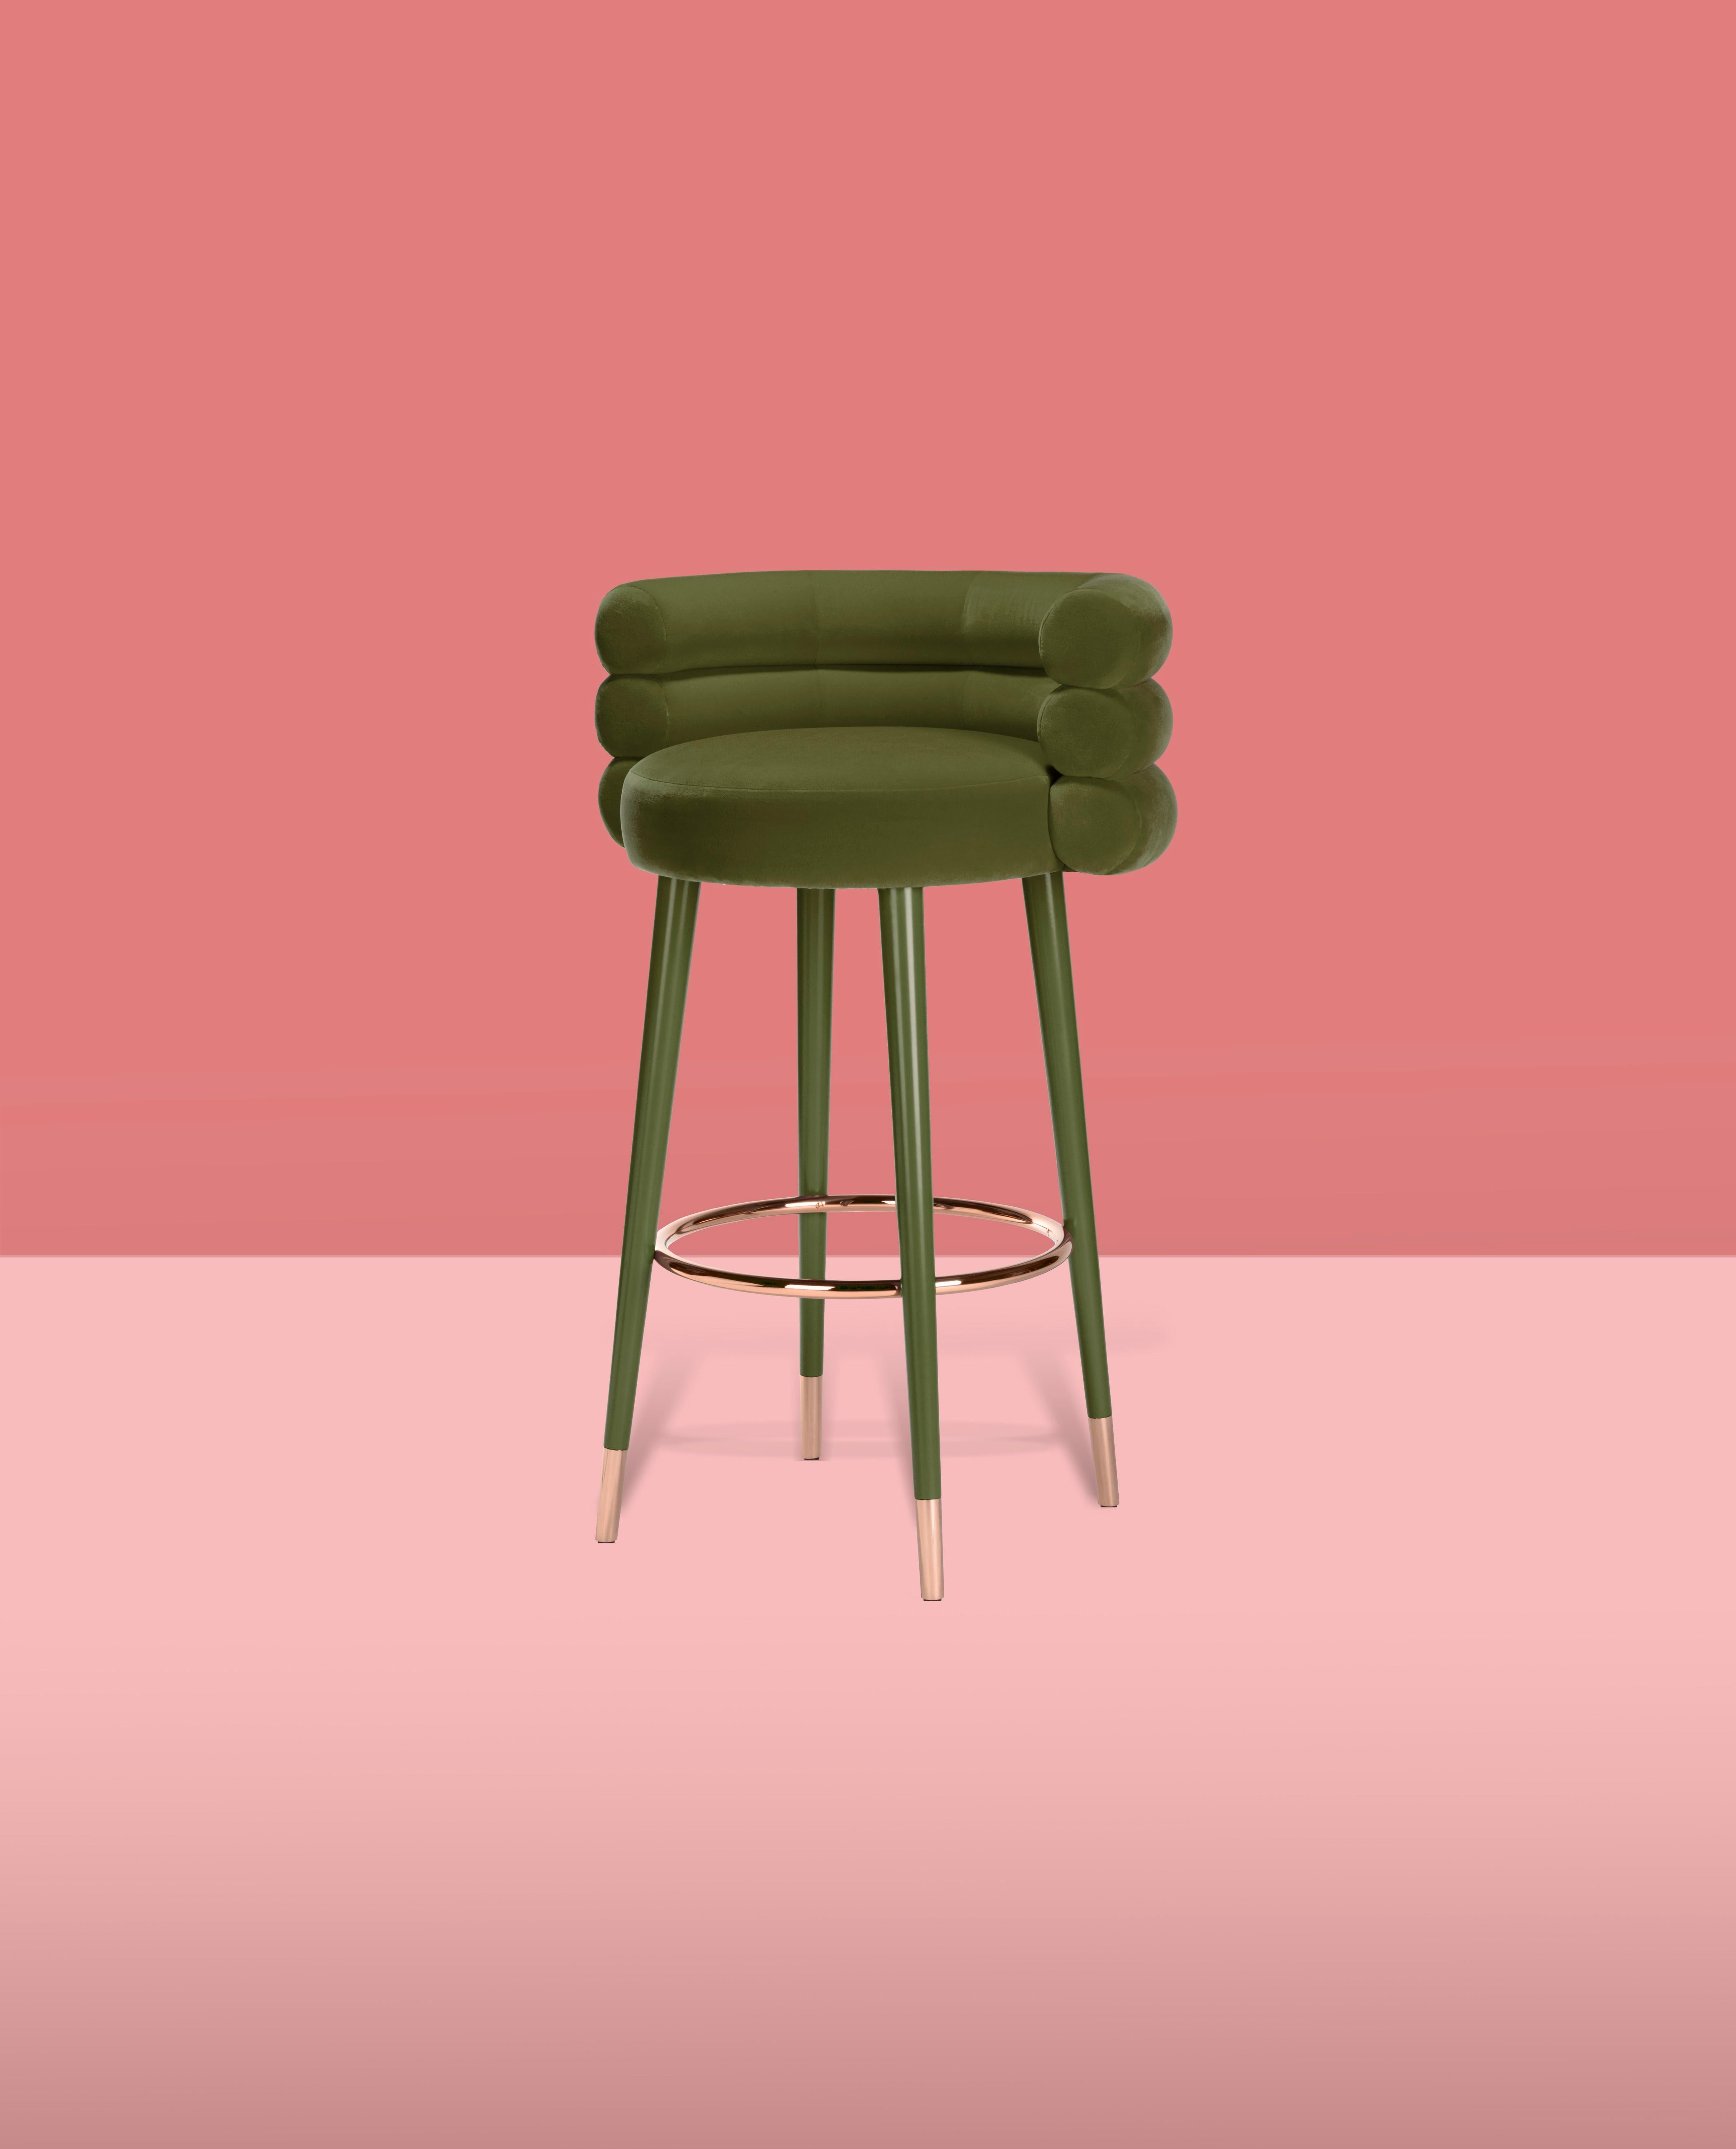 Marshmallow bar stool, Royal stranger
Dimensions: 100 x 70 x 60 cm
Materials: Velvet upholstery, brass
Available in: Mint green, light pink, Royal green, and Royal red

Royal stranger is an exclusive furniture brand determined to bring you the